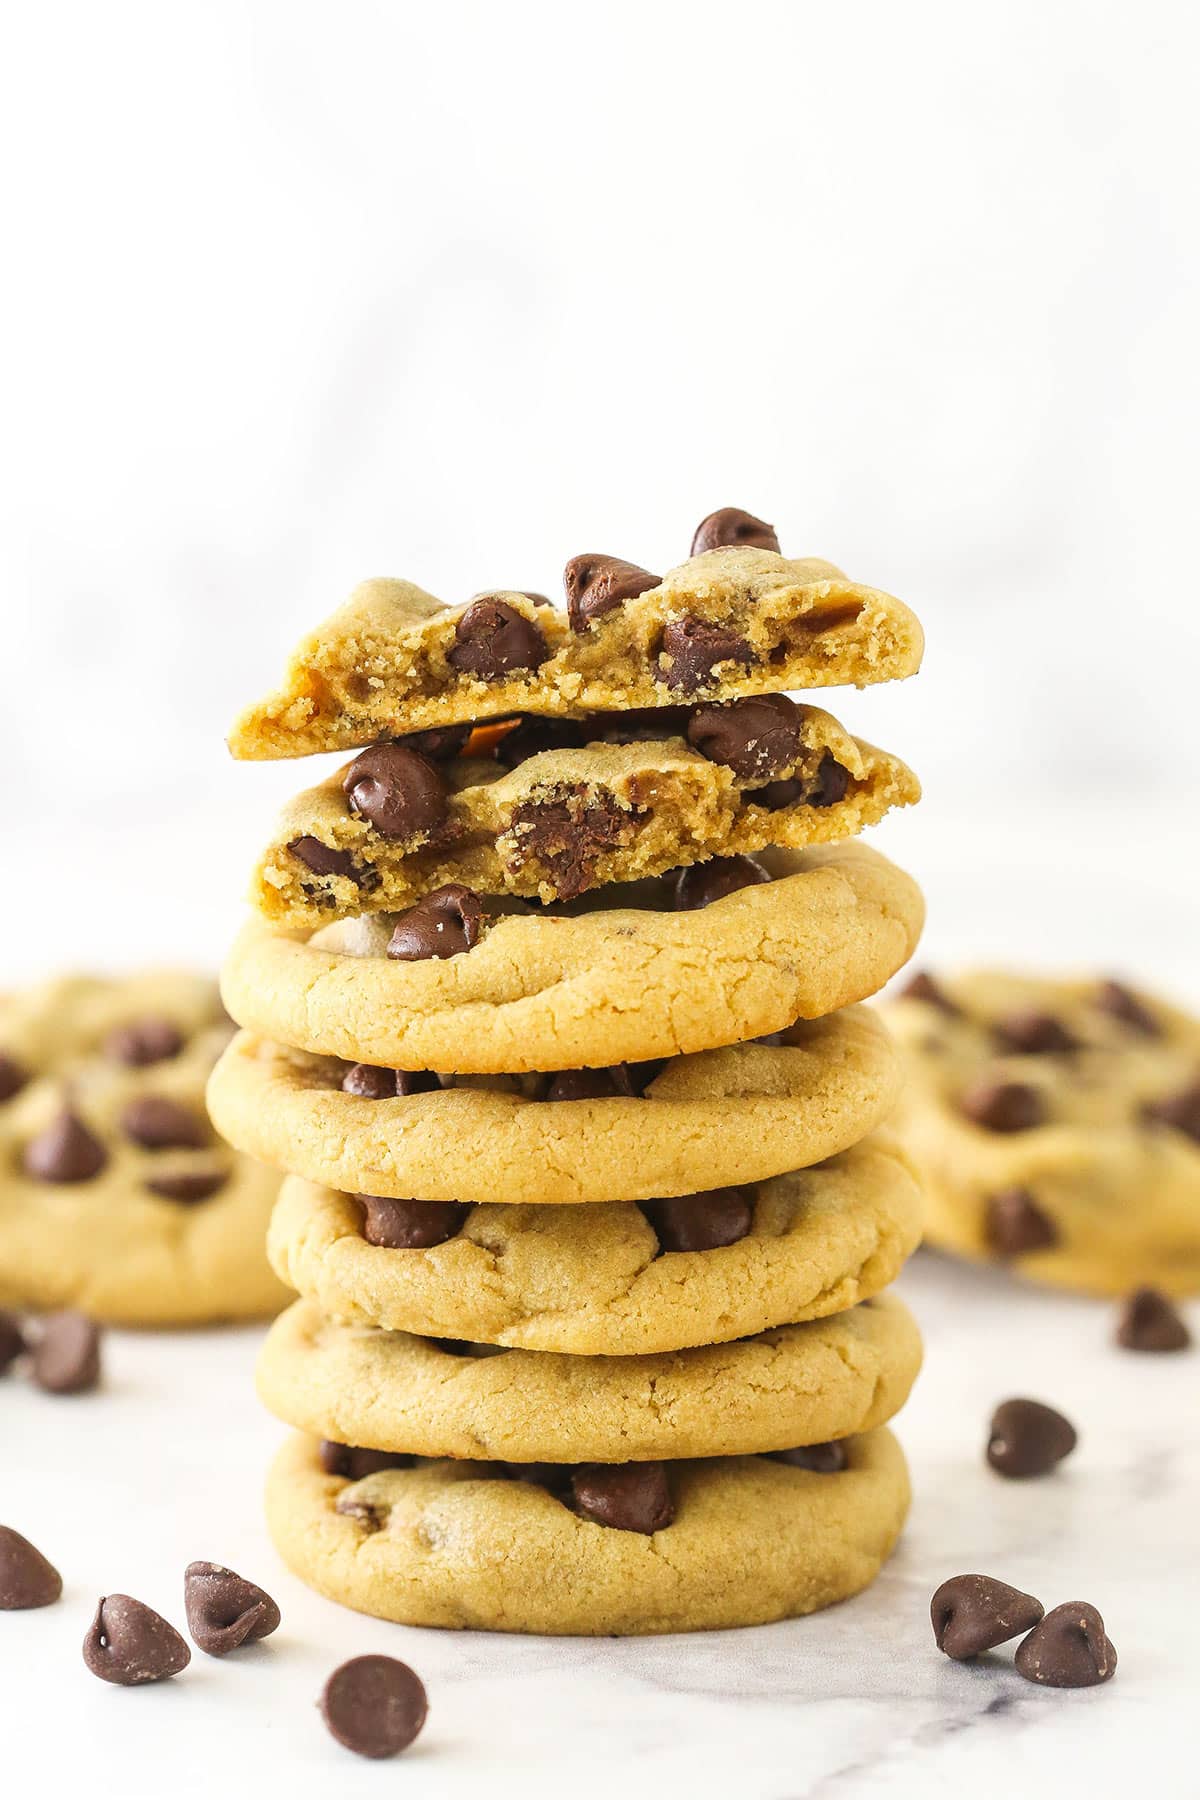 A stack of peanut butter chocolate chip cookies with the top cookie broken in half